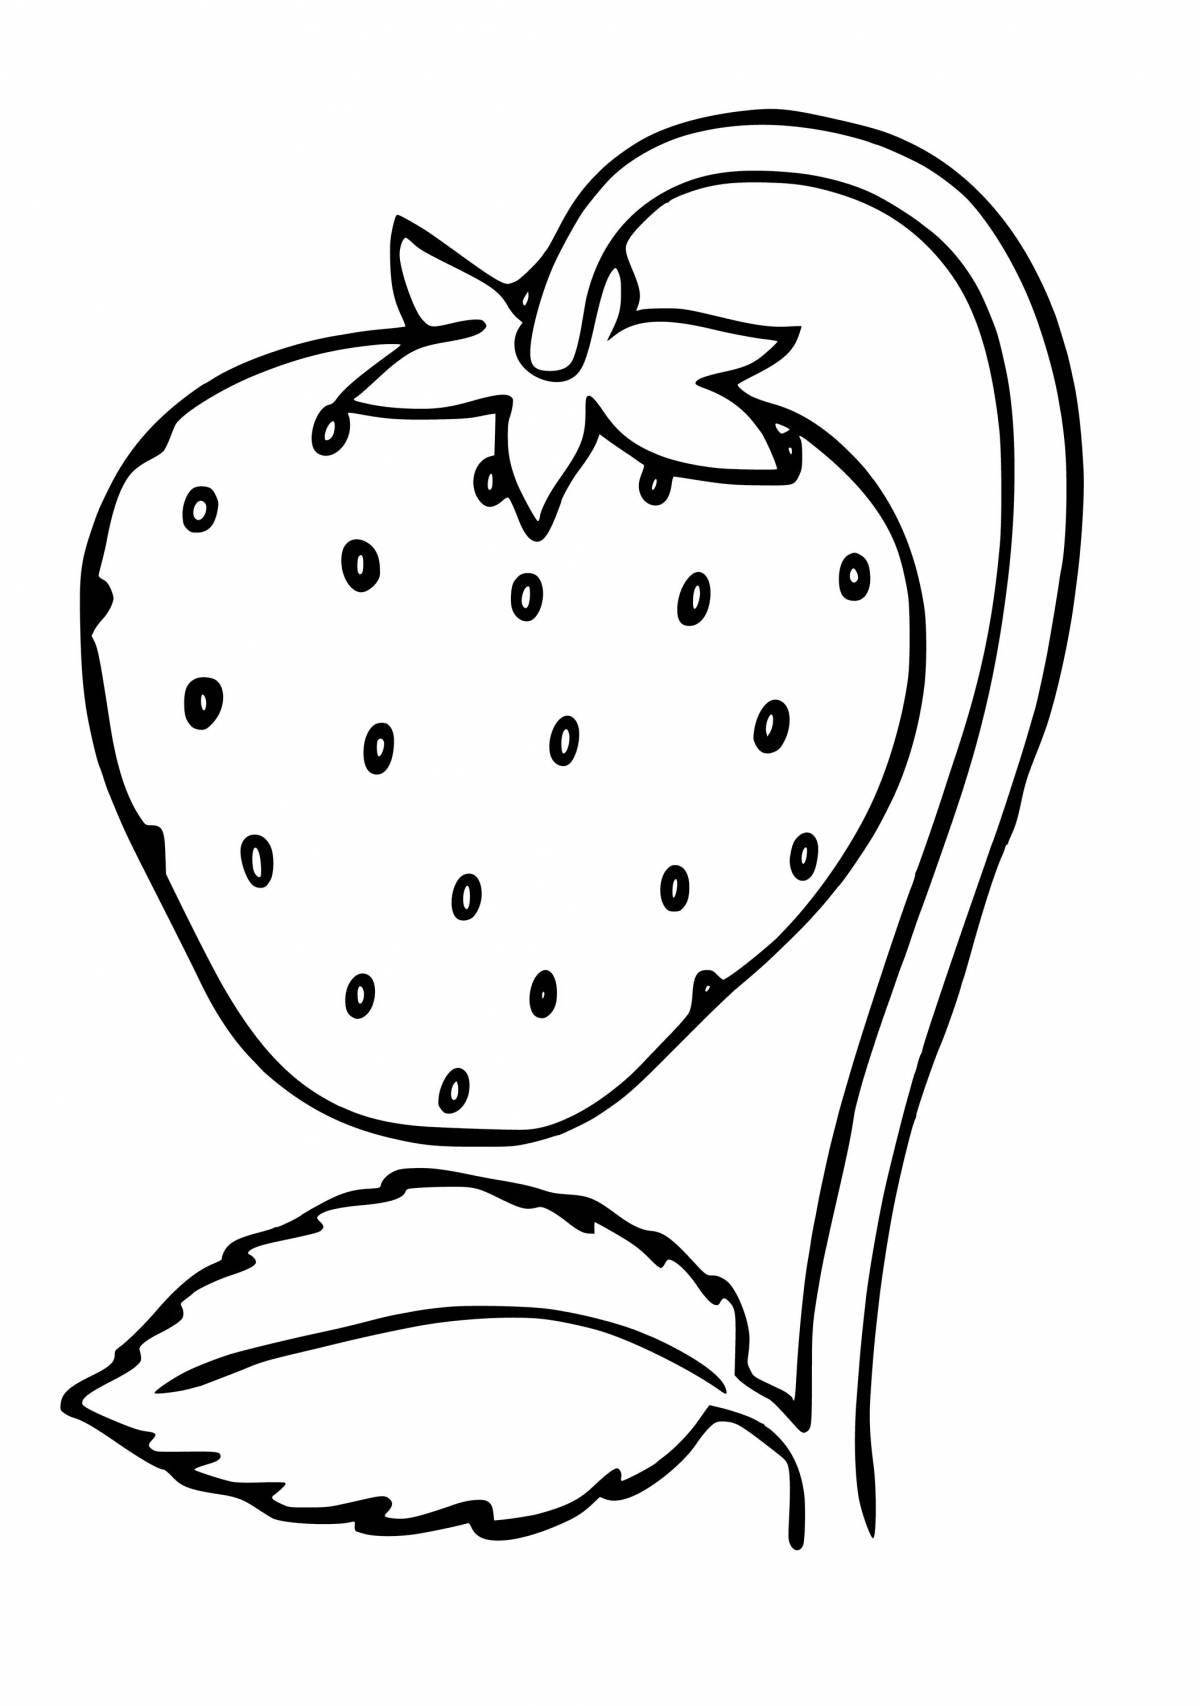 Fancy strawberry coloring book for kids